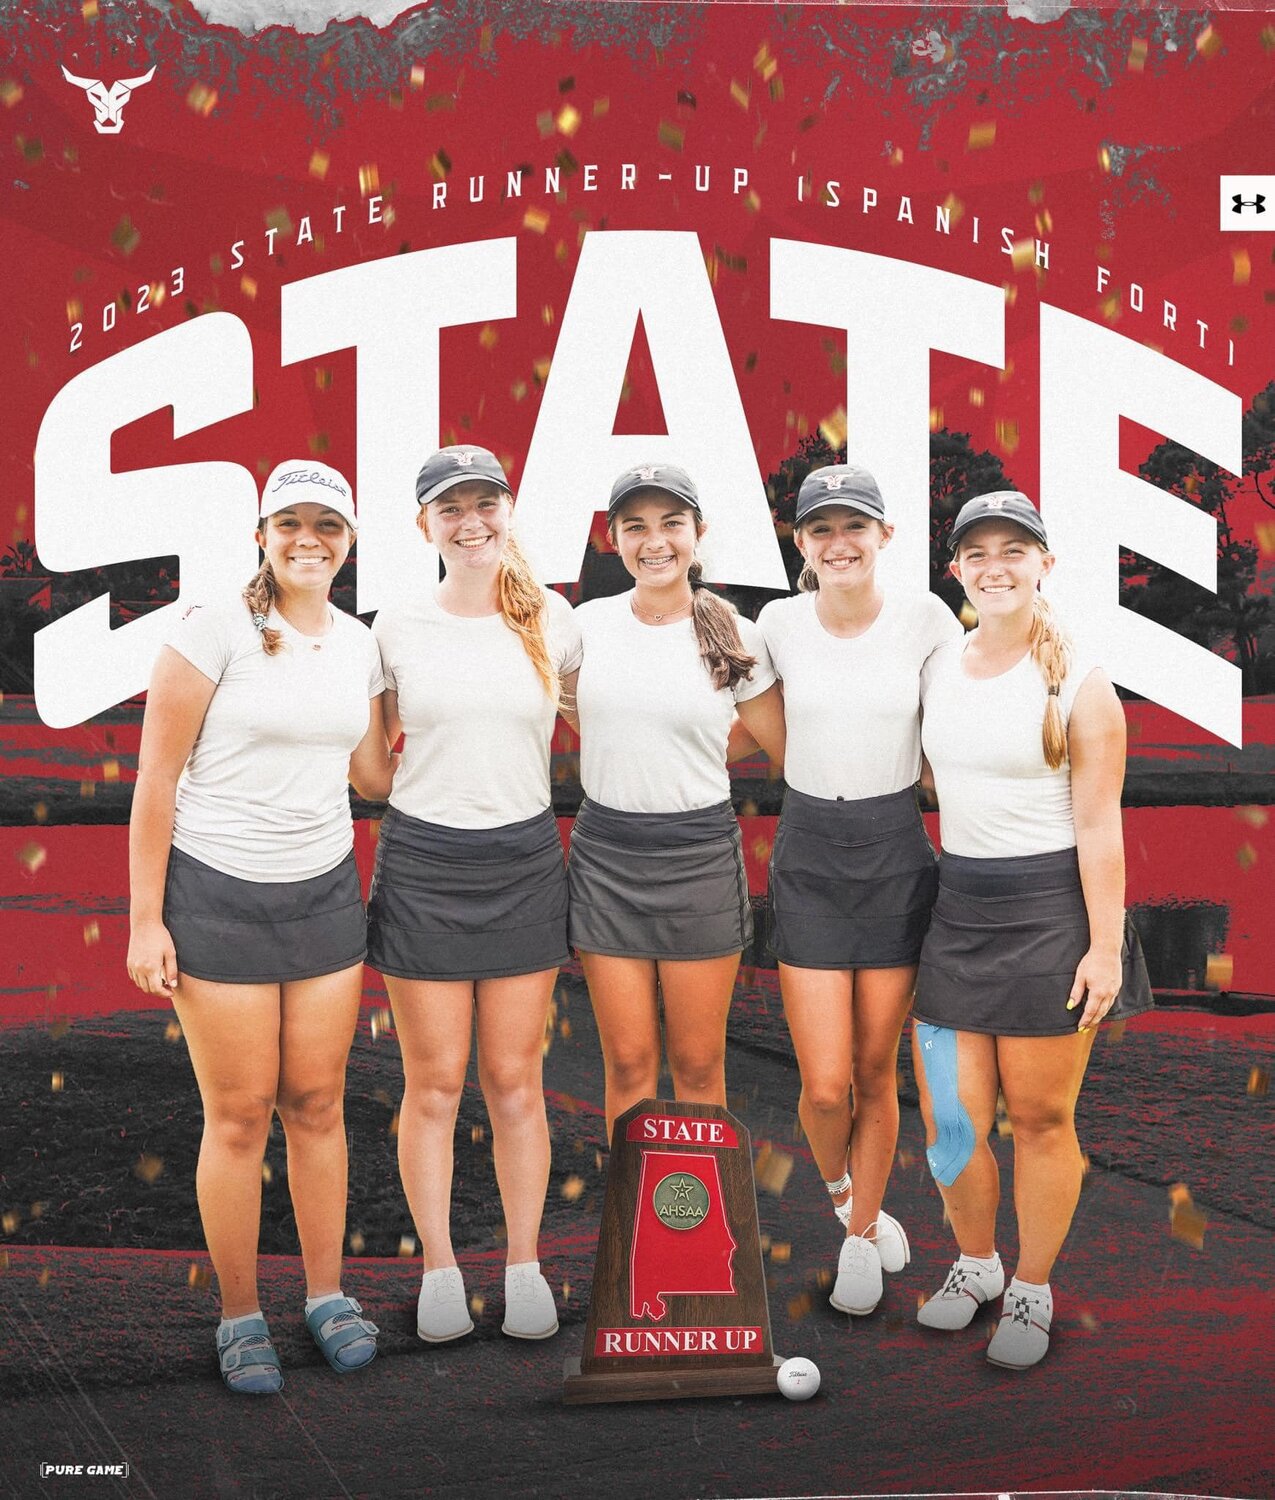 The Spanish Fort Toro girls’ golf team competed at the RTJ Grand National Golf Course in Opelika and returned with a Red Map trophy following their runner-up finish at the Class 6A state tournament. Ashlynd Madden led the way with a two-round total of 152 and was joined by all of her teammates in finishing in the top 15 individually.